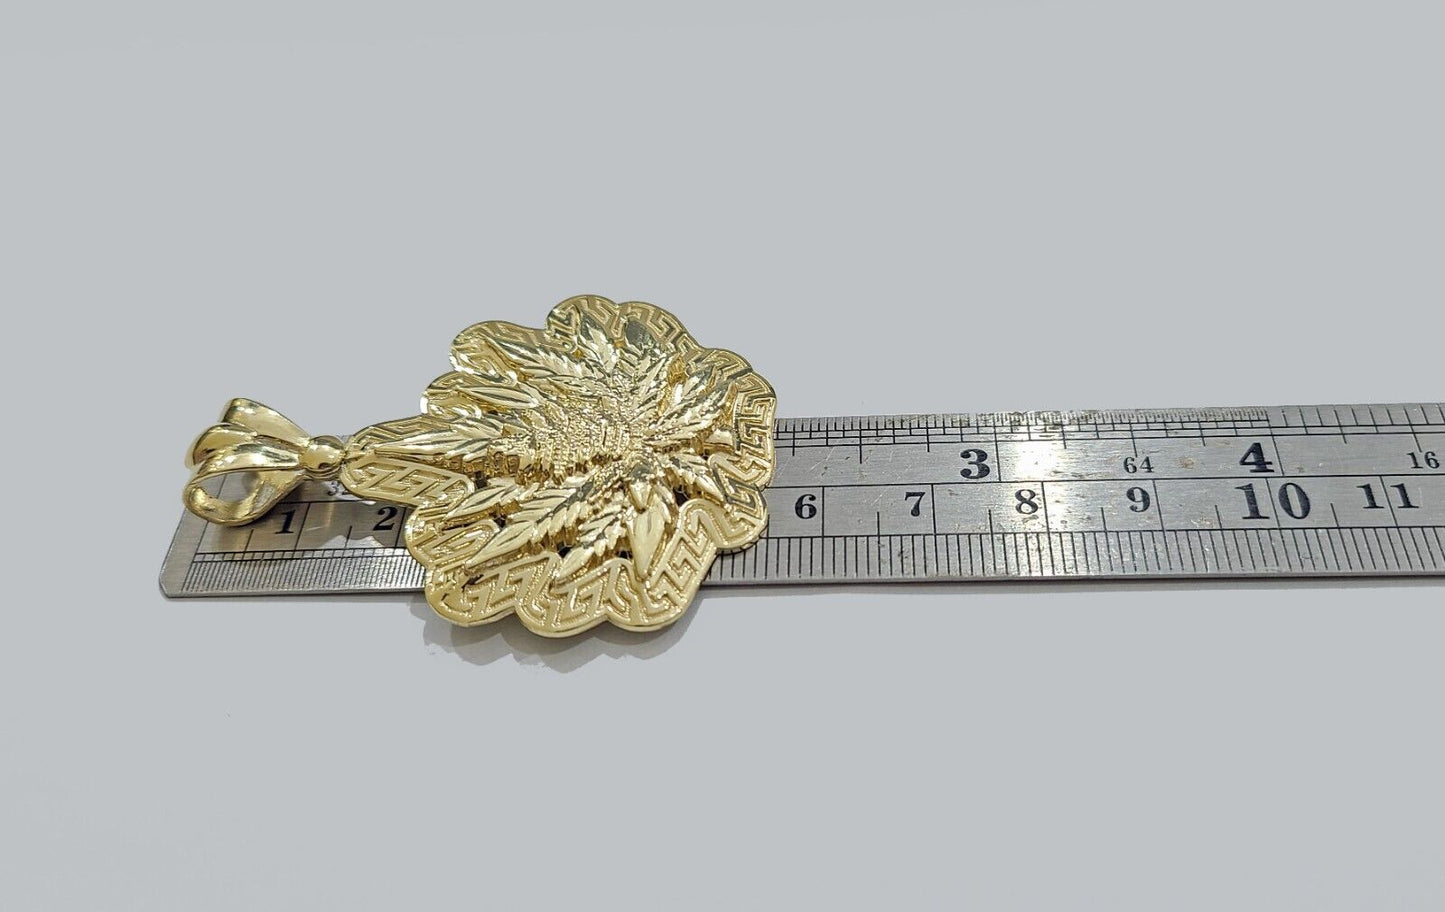 Real 10k Gold Weed leaf Charm Pendant 10kt Yellow Gold Unisex